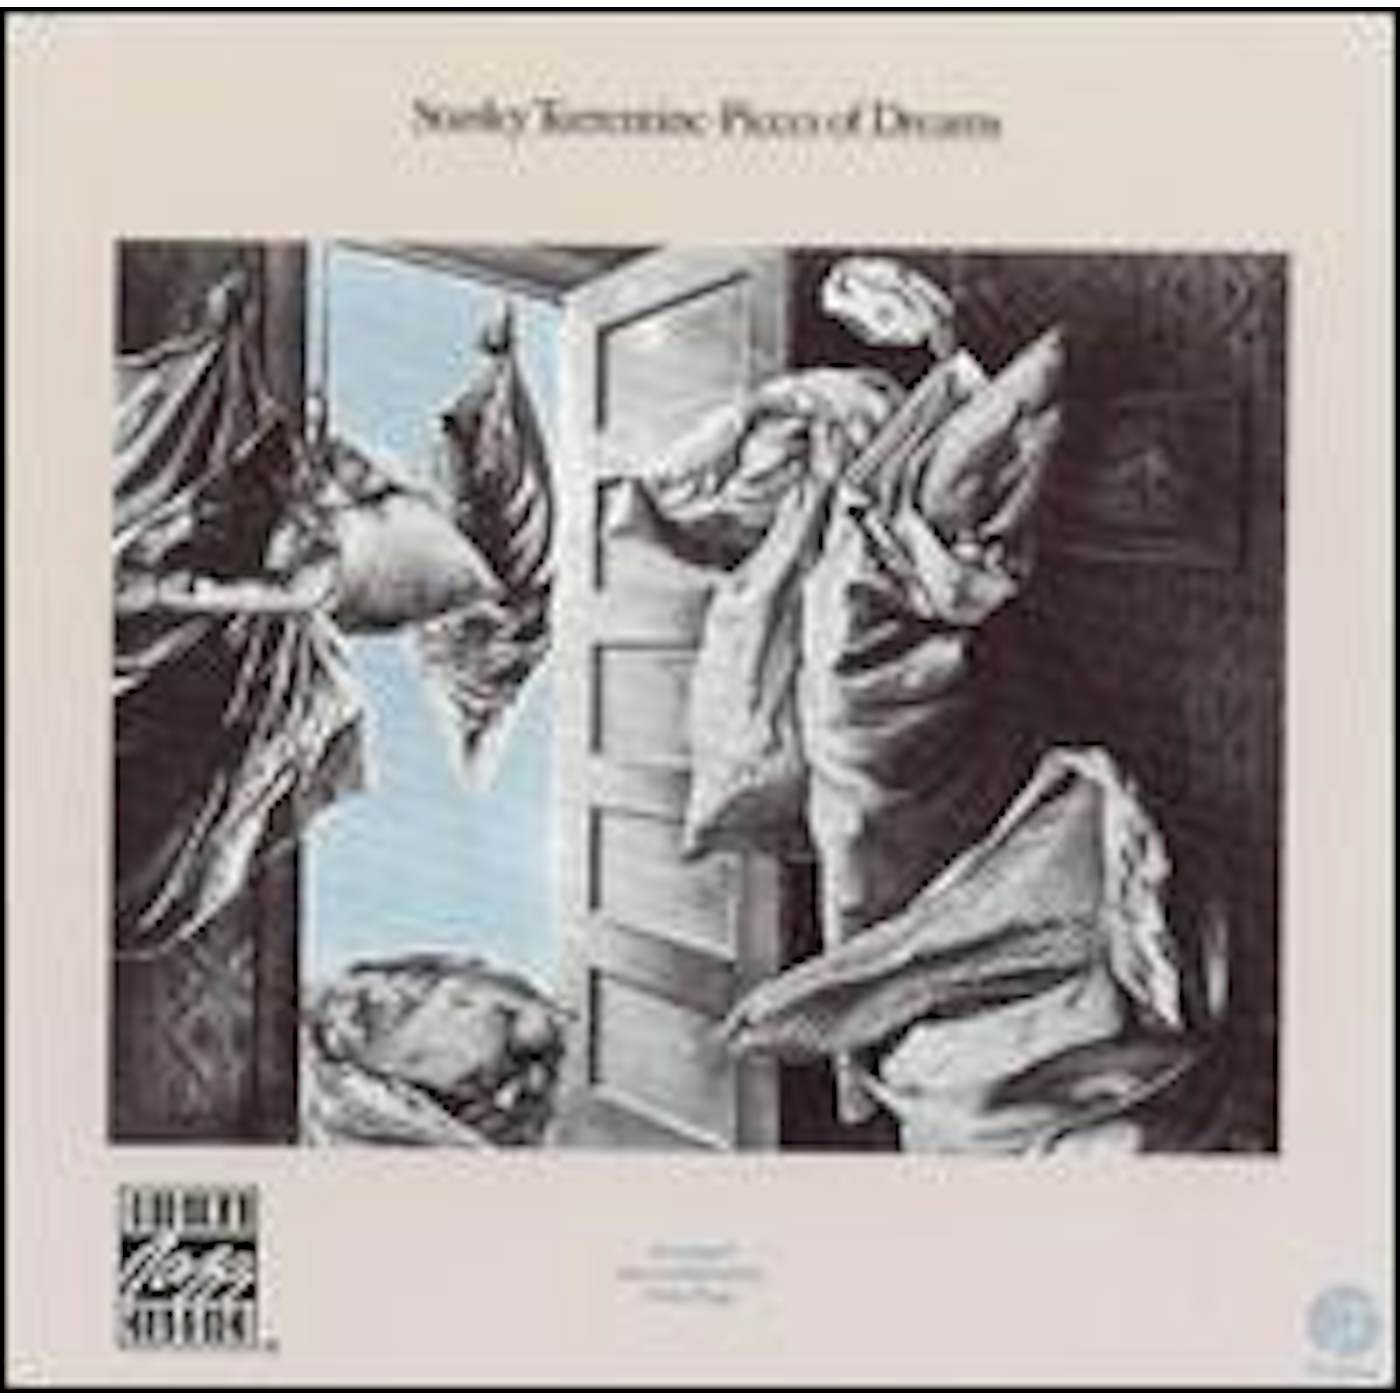 Stanley Turrentine PIECES OF DREAMS CD